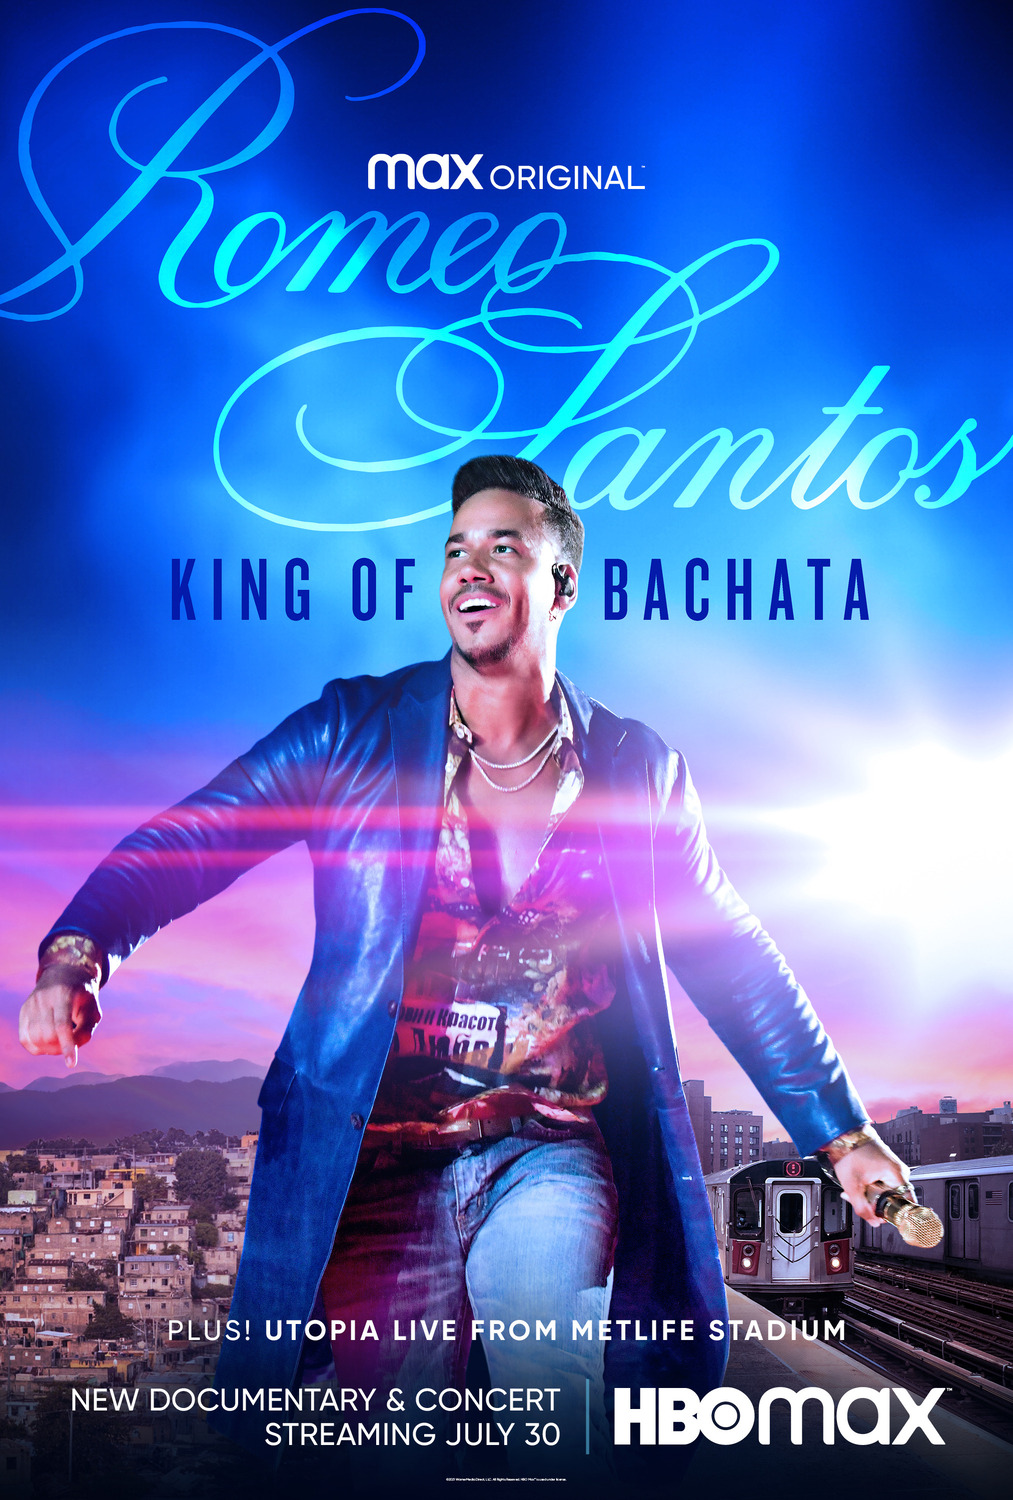 Extra Large TV Poster Image for Romeo Santos: King Of Bachata 